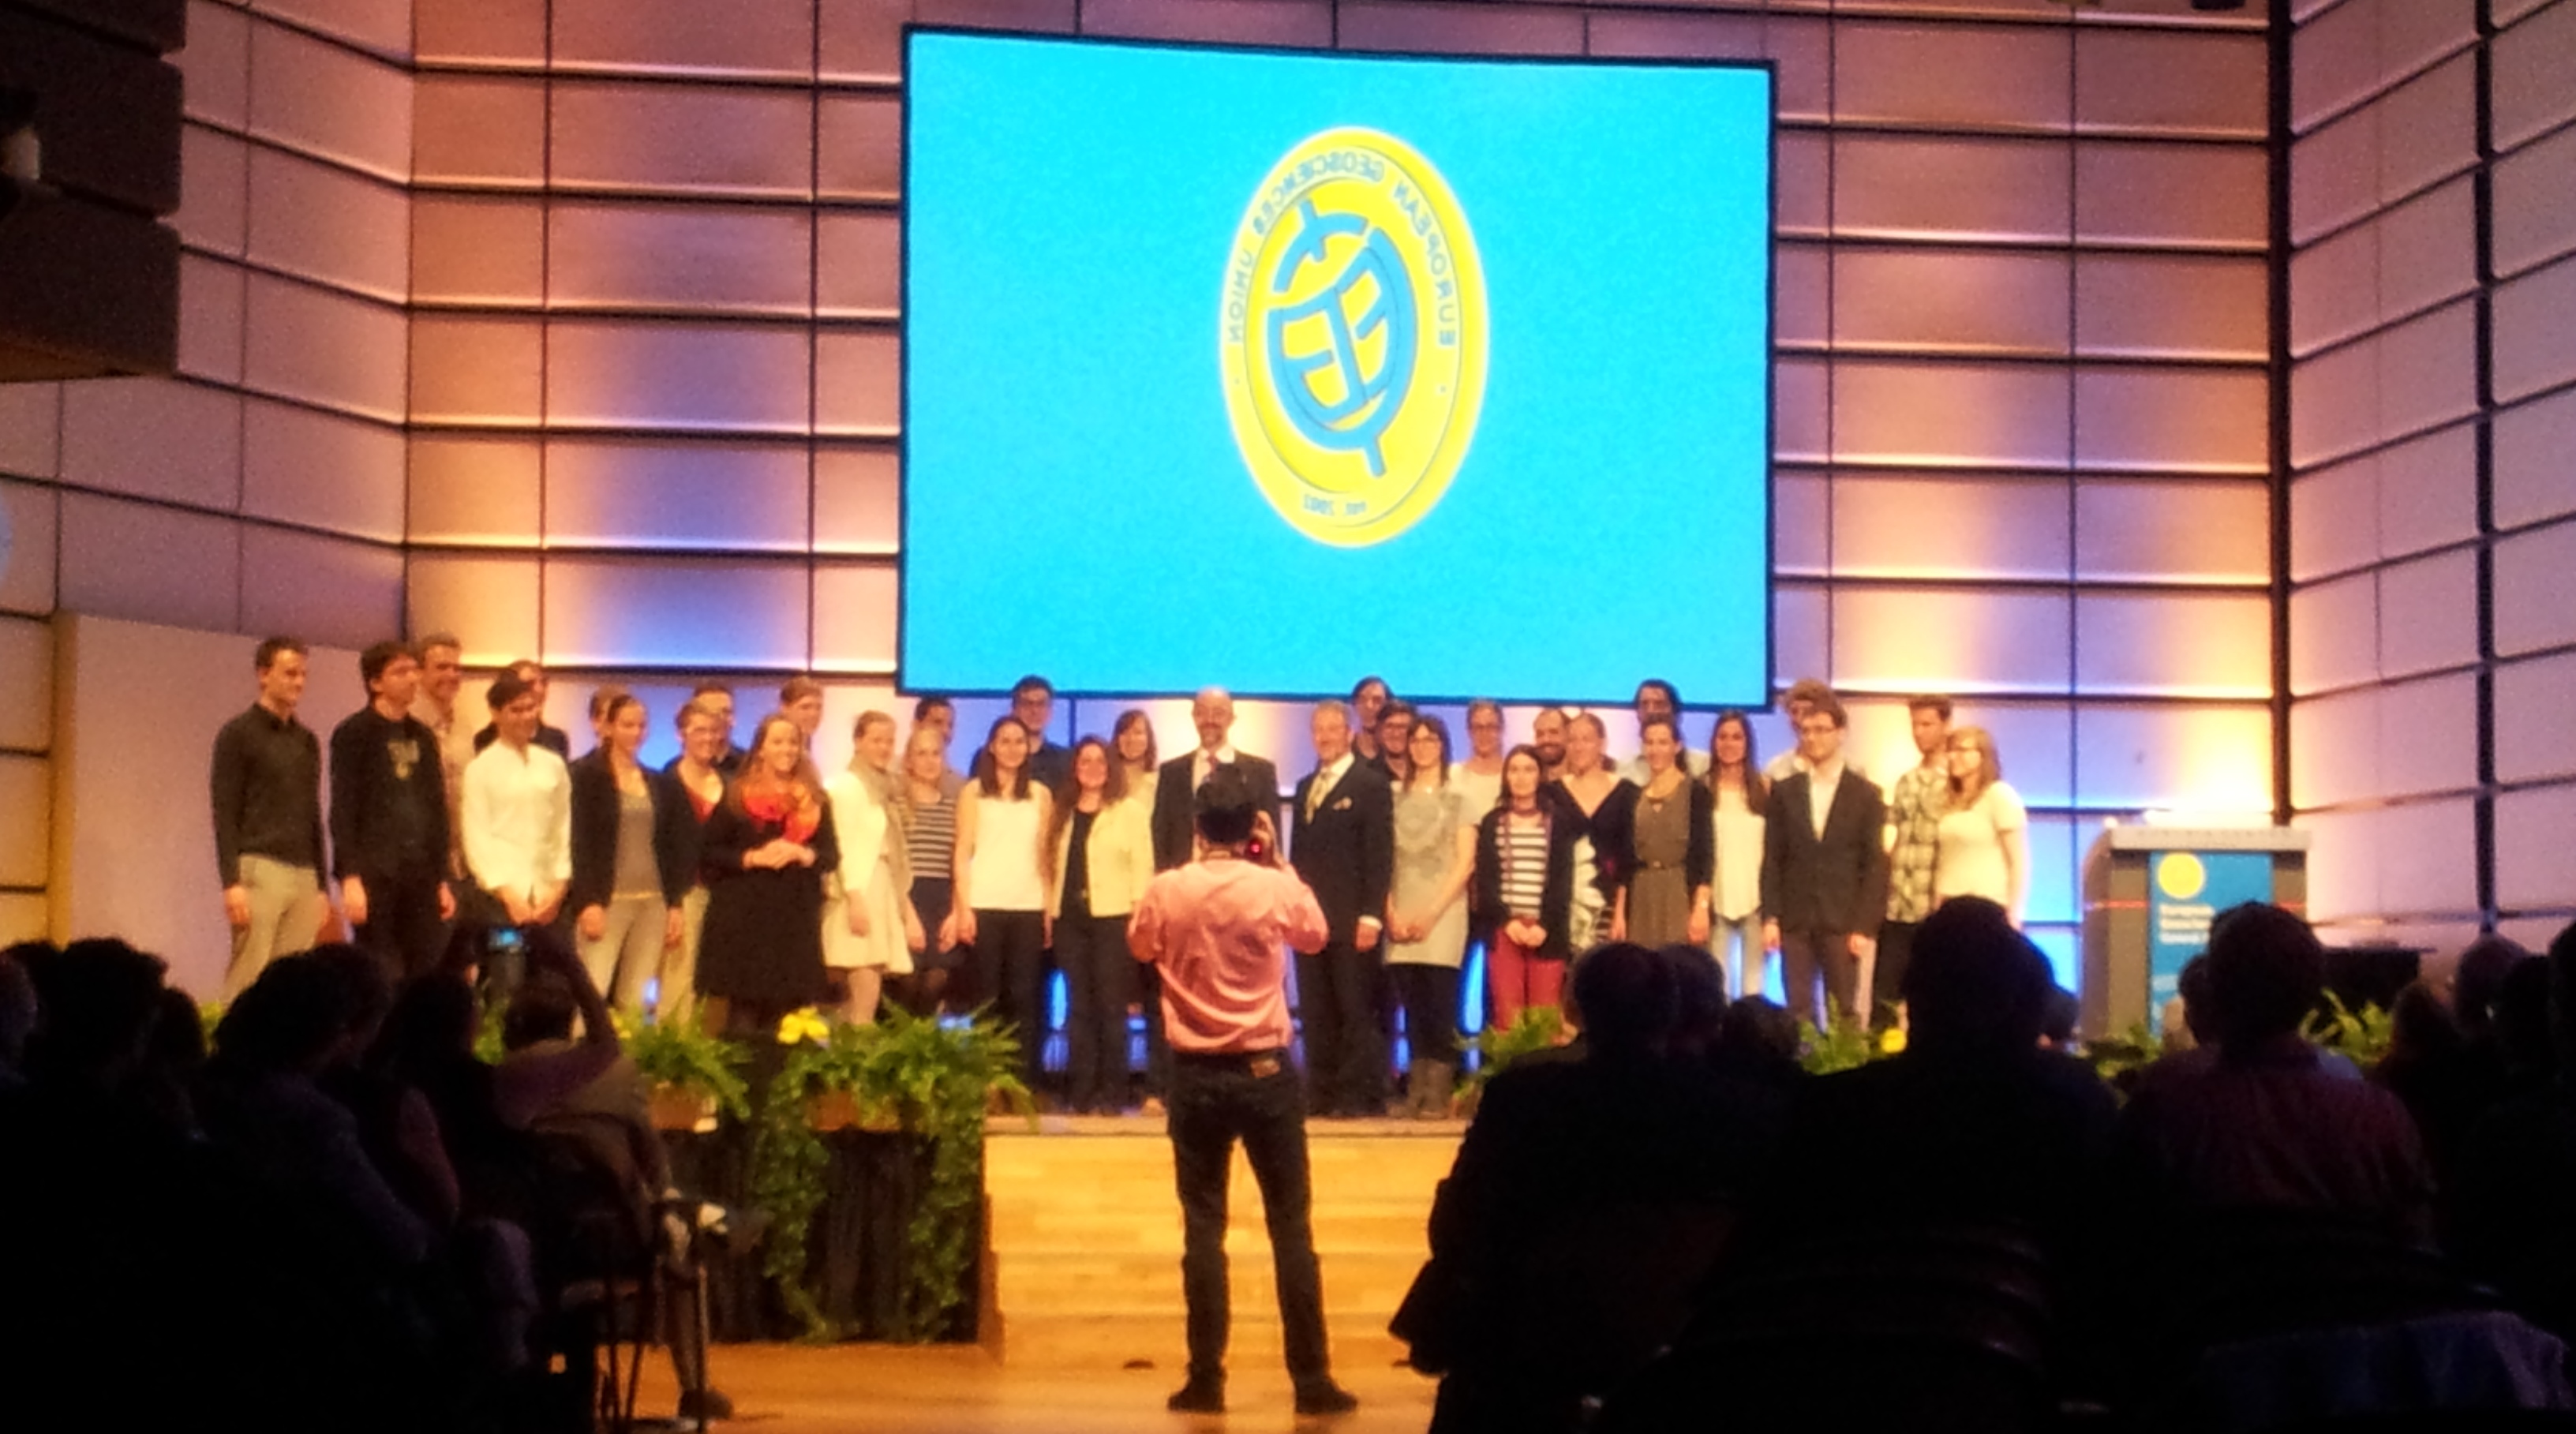 Award Ceremony at the EGU GA 2015. Will you be on stage next year?